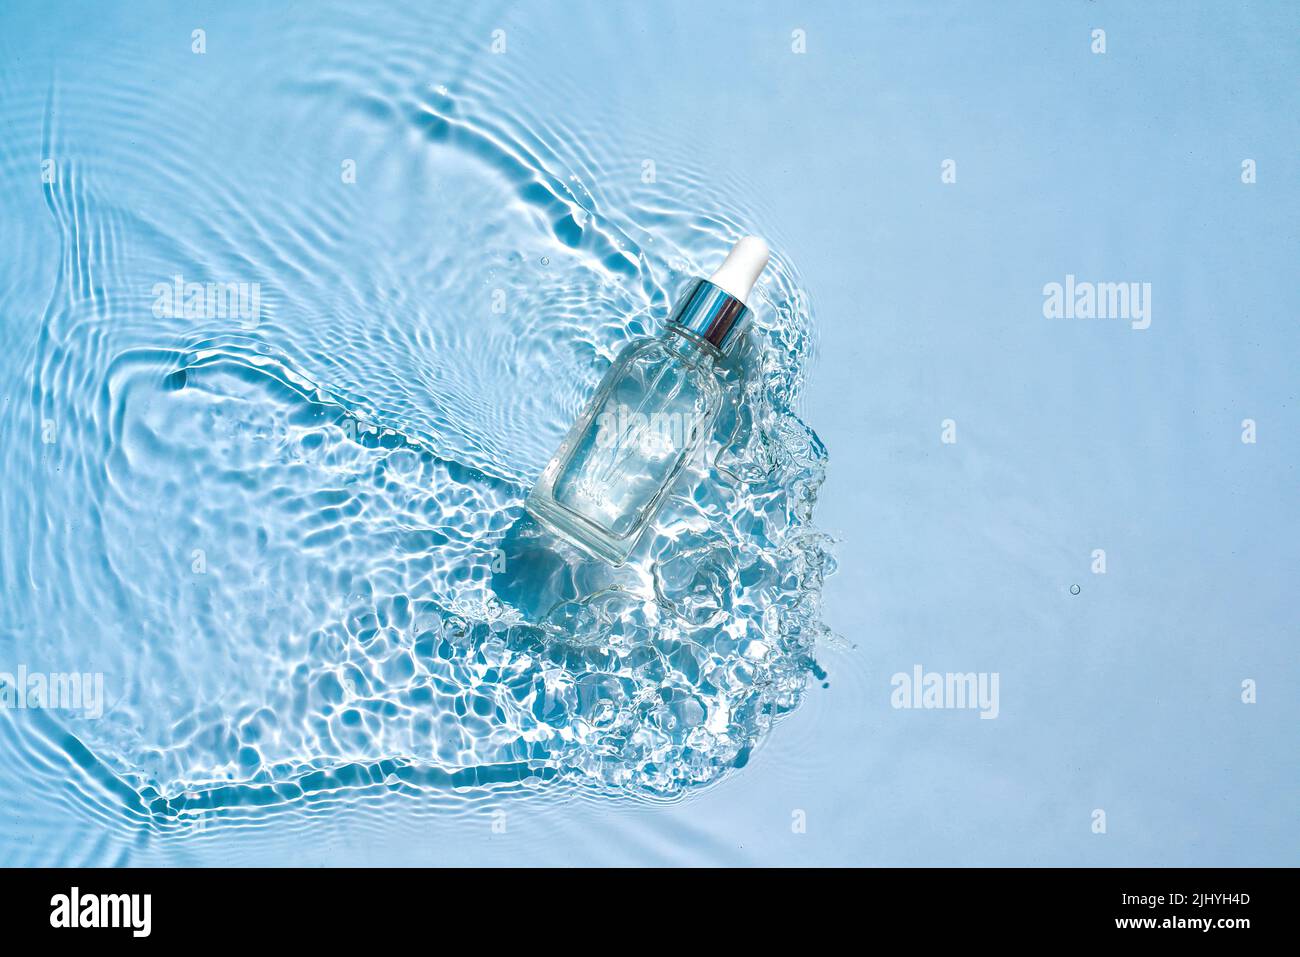 Moisturizing cosmetic product, serum, in transparent bottle in water waves Stock Photo